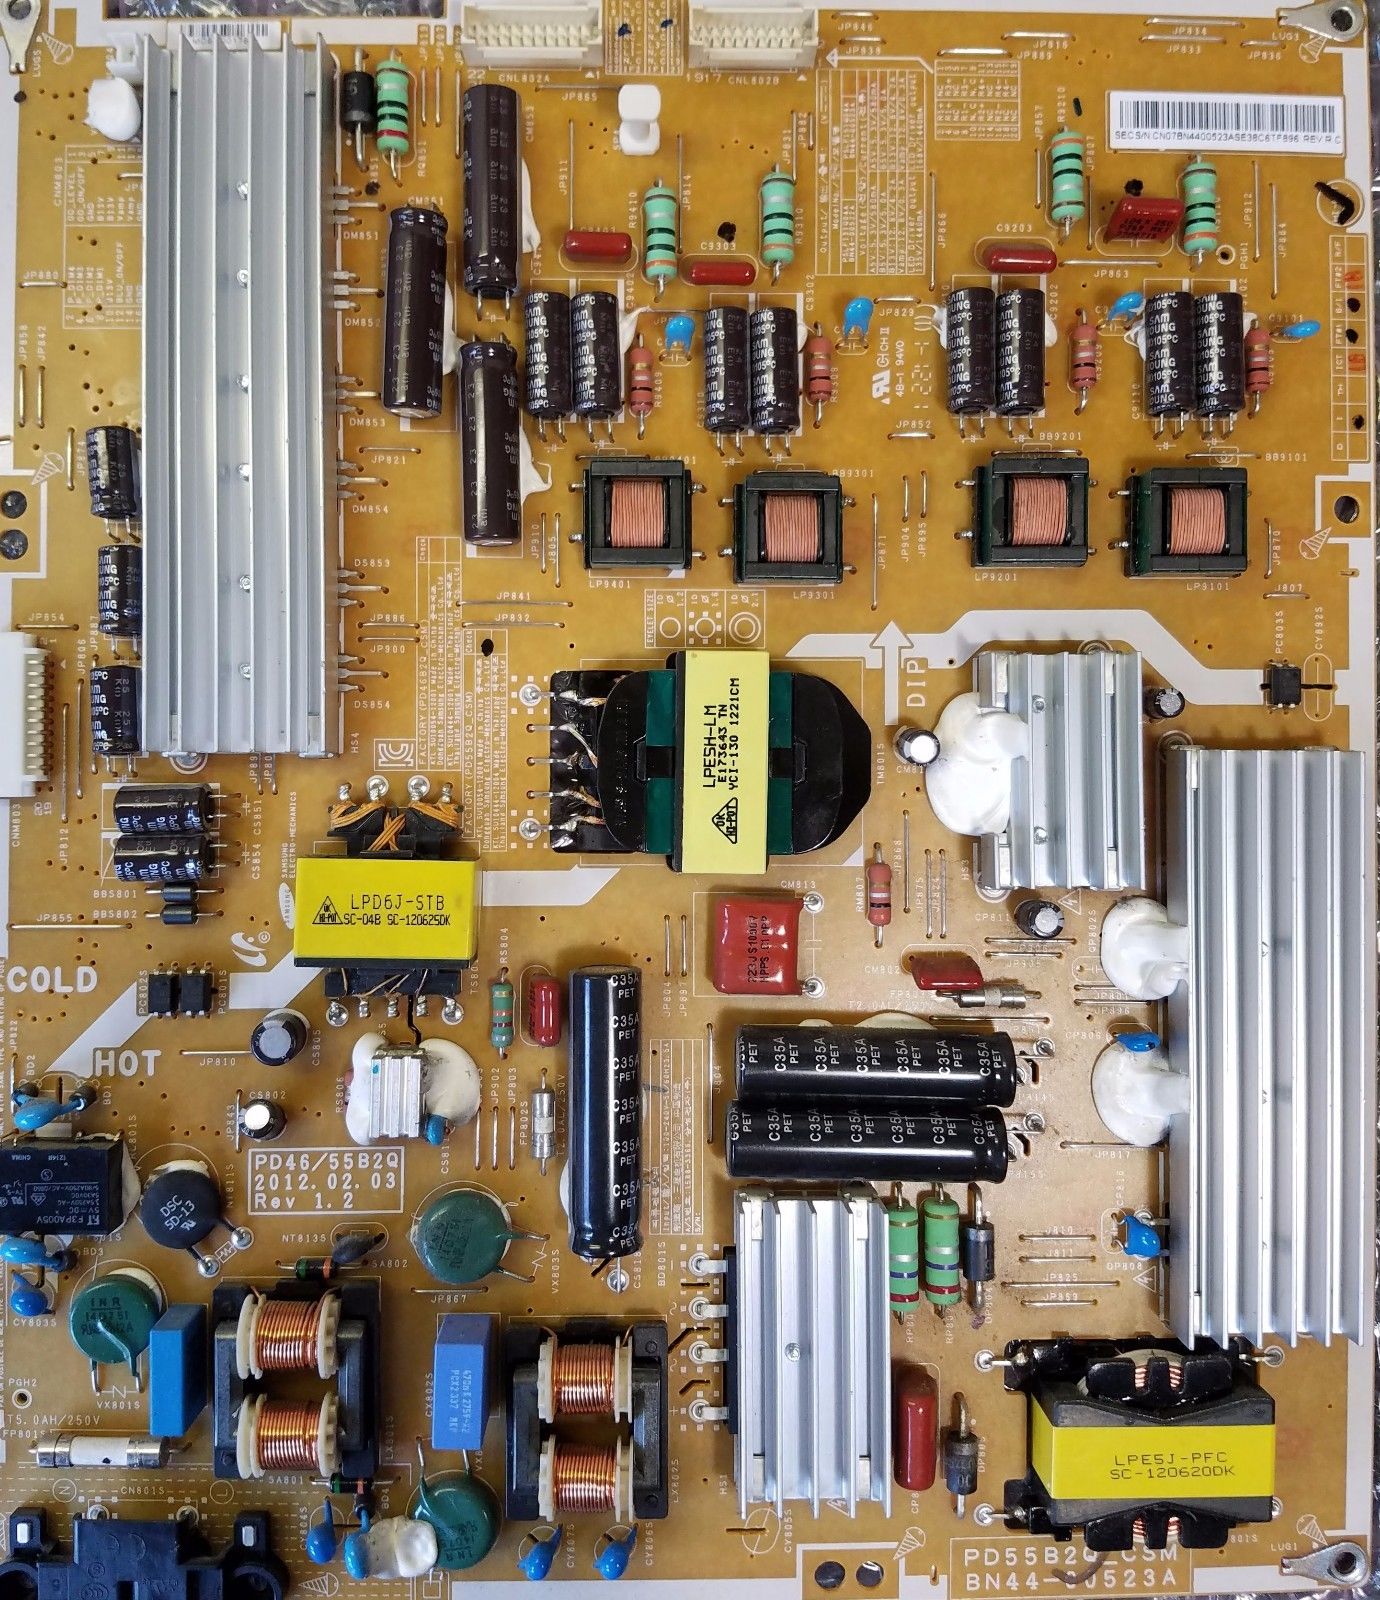 Samsung 55" UN55ES7100 BN44-00523A LED LCD Power Supply LED Board - Click Image to Close